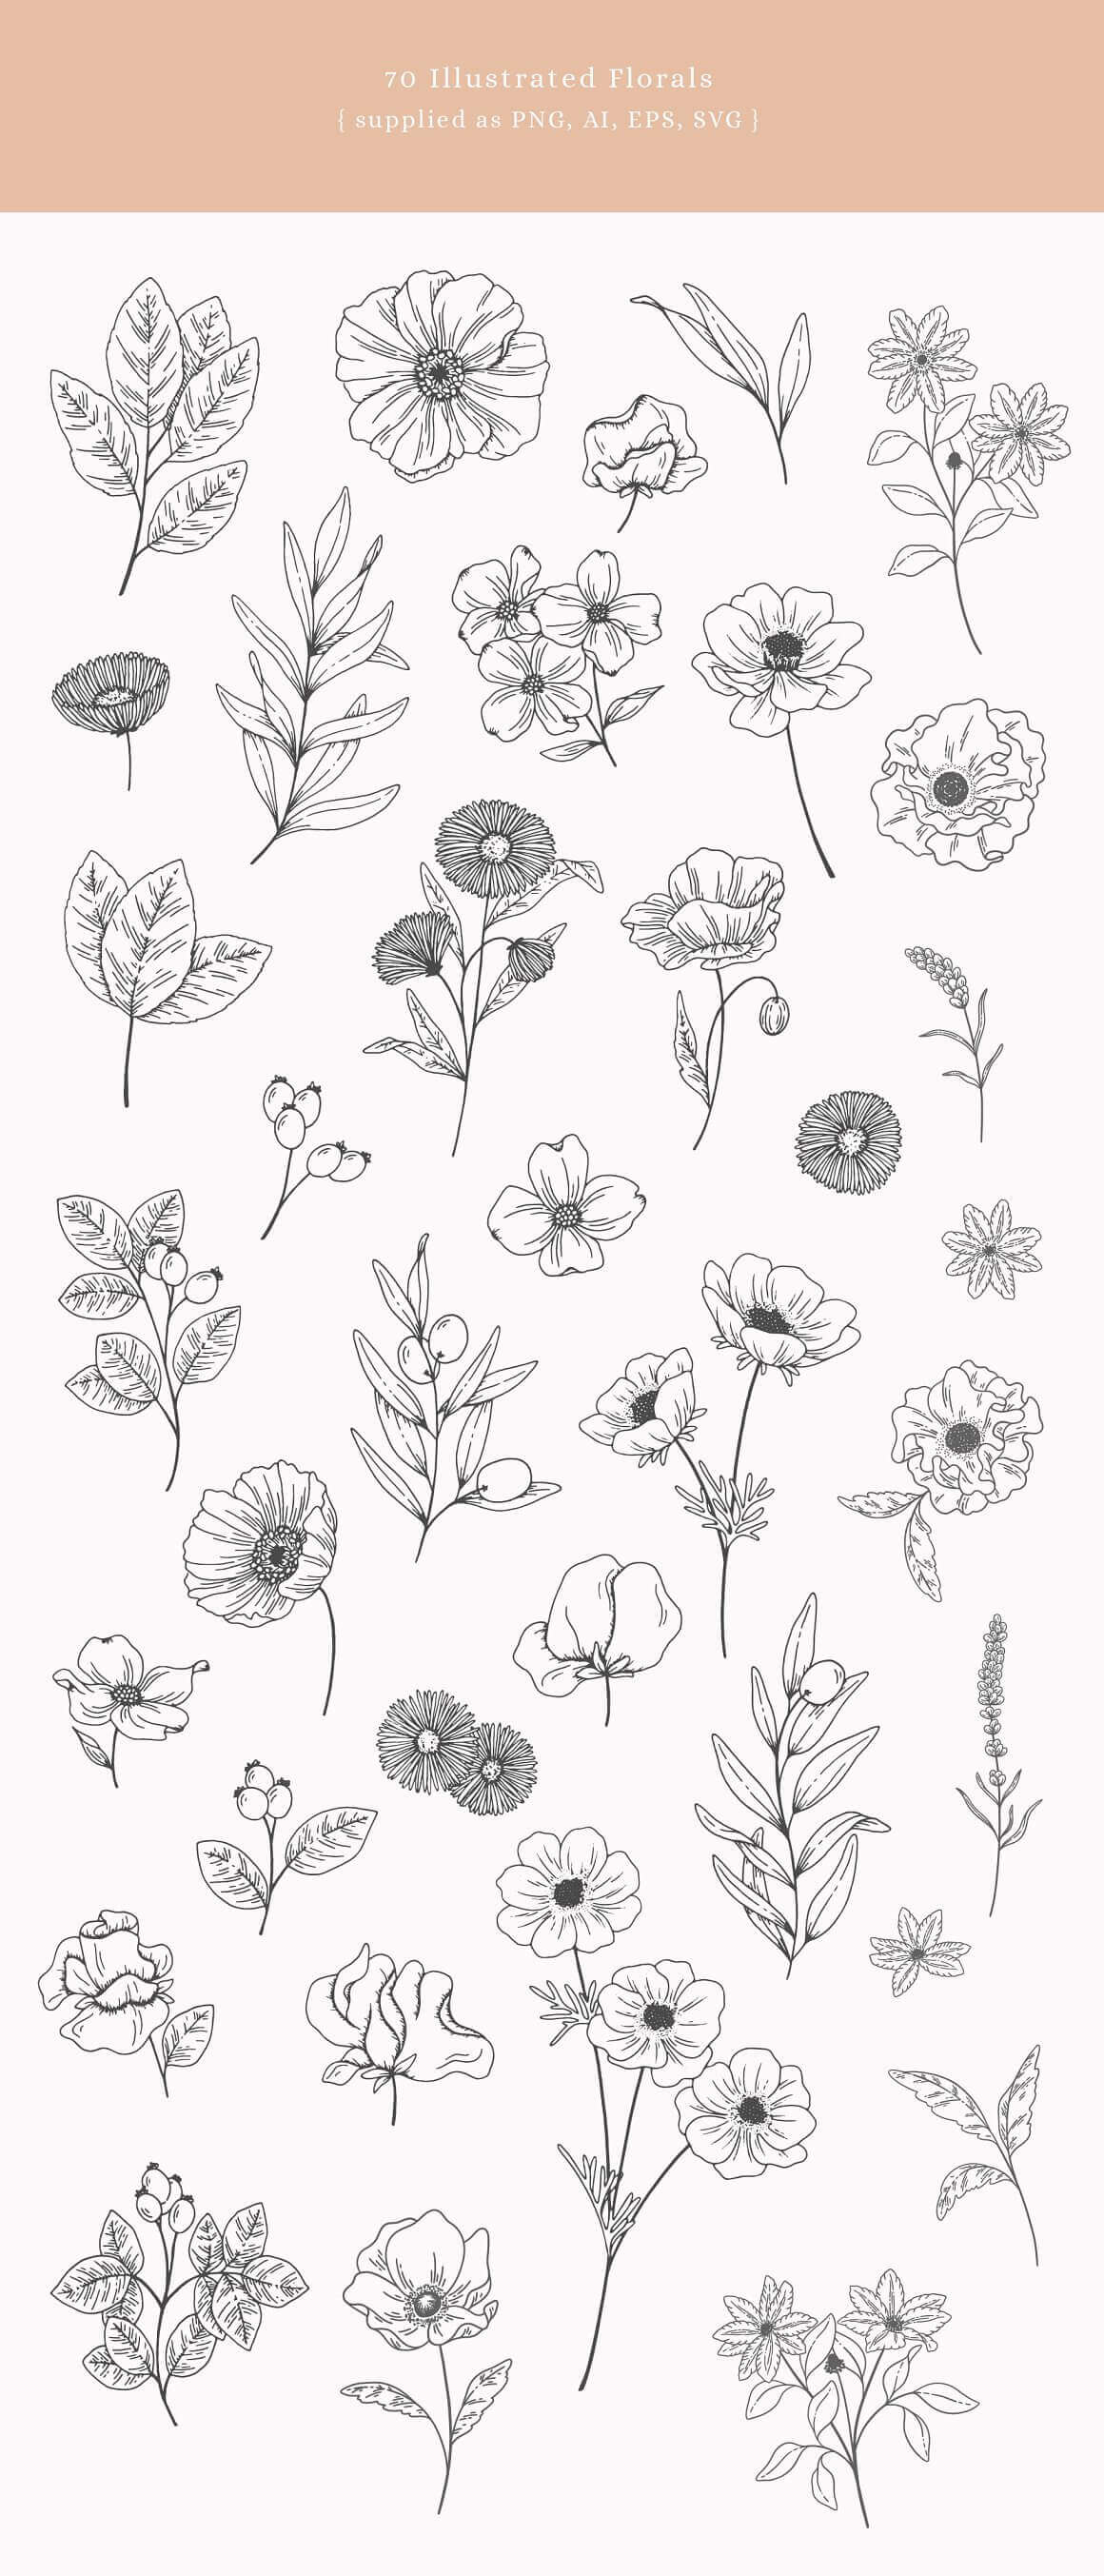 Florals Supplied as PNG, AI, EPS, SVG.